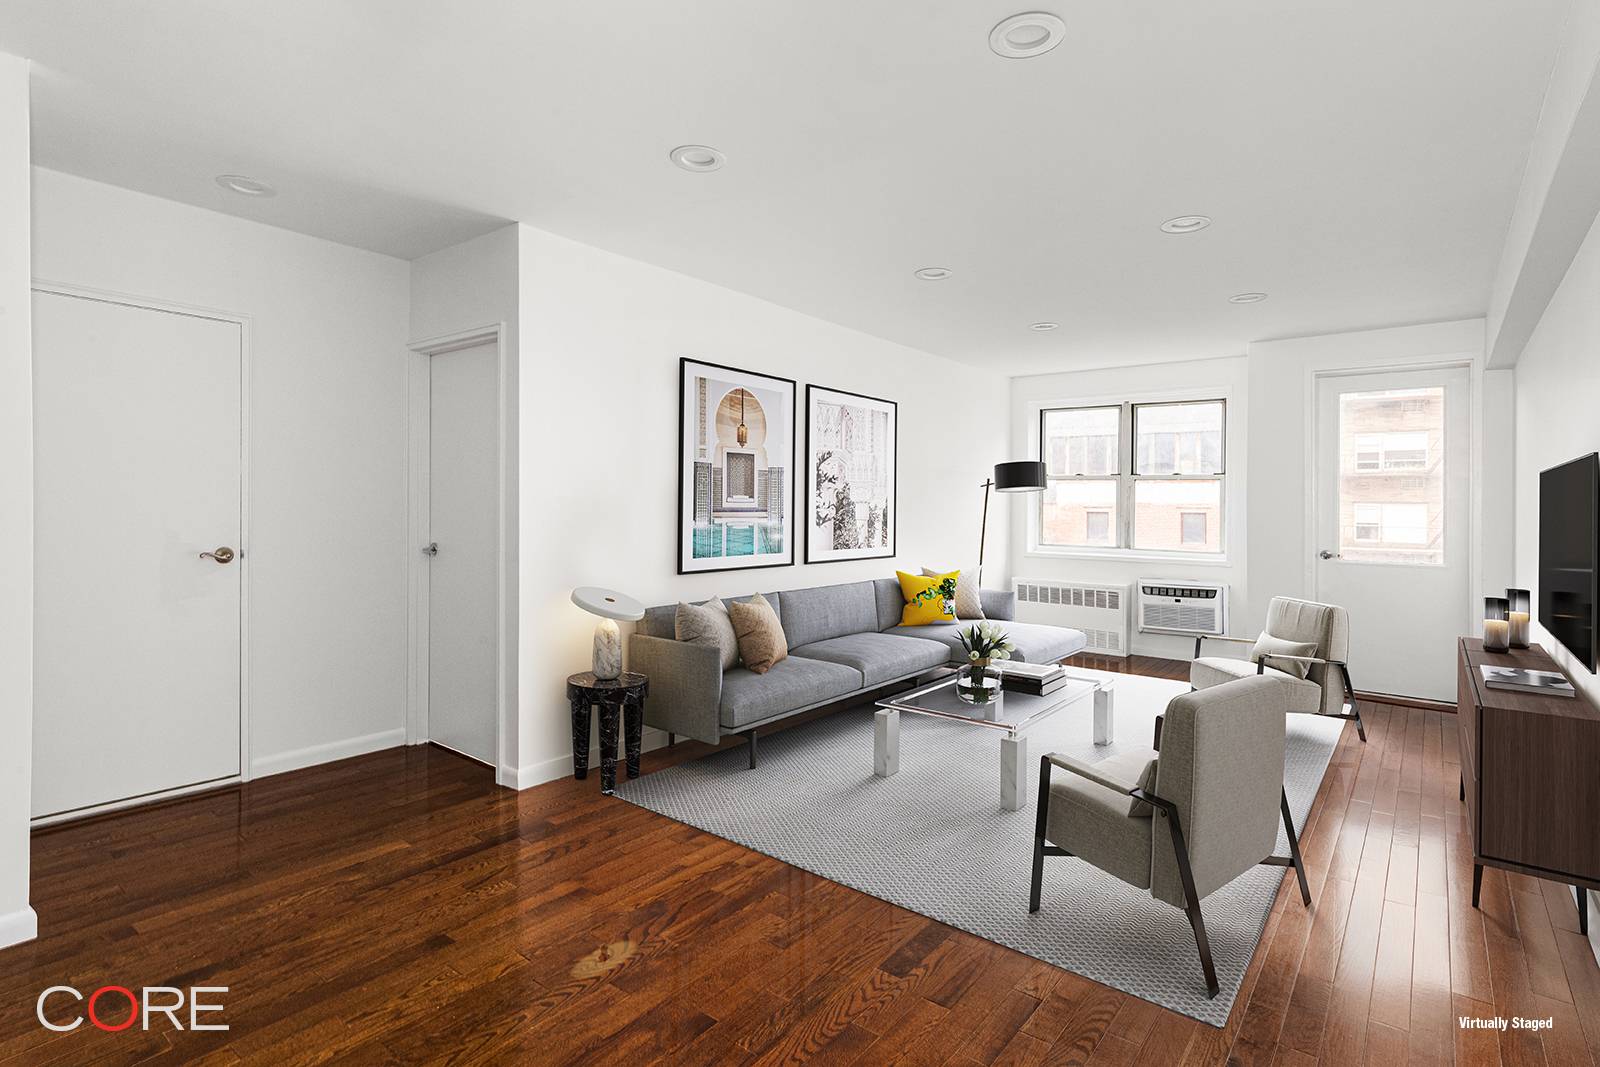 Enjoy modern luxuries in this newly renovated spacious 1 bedroom, 1 bathroom home in the heart of Chelsea.